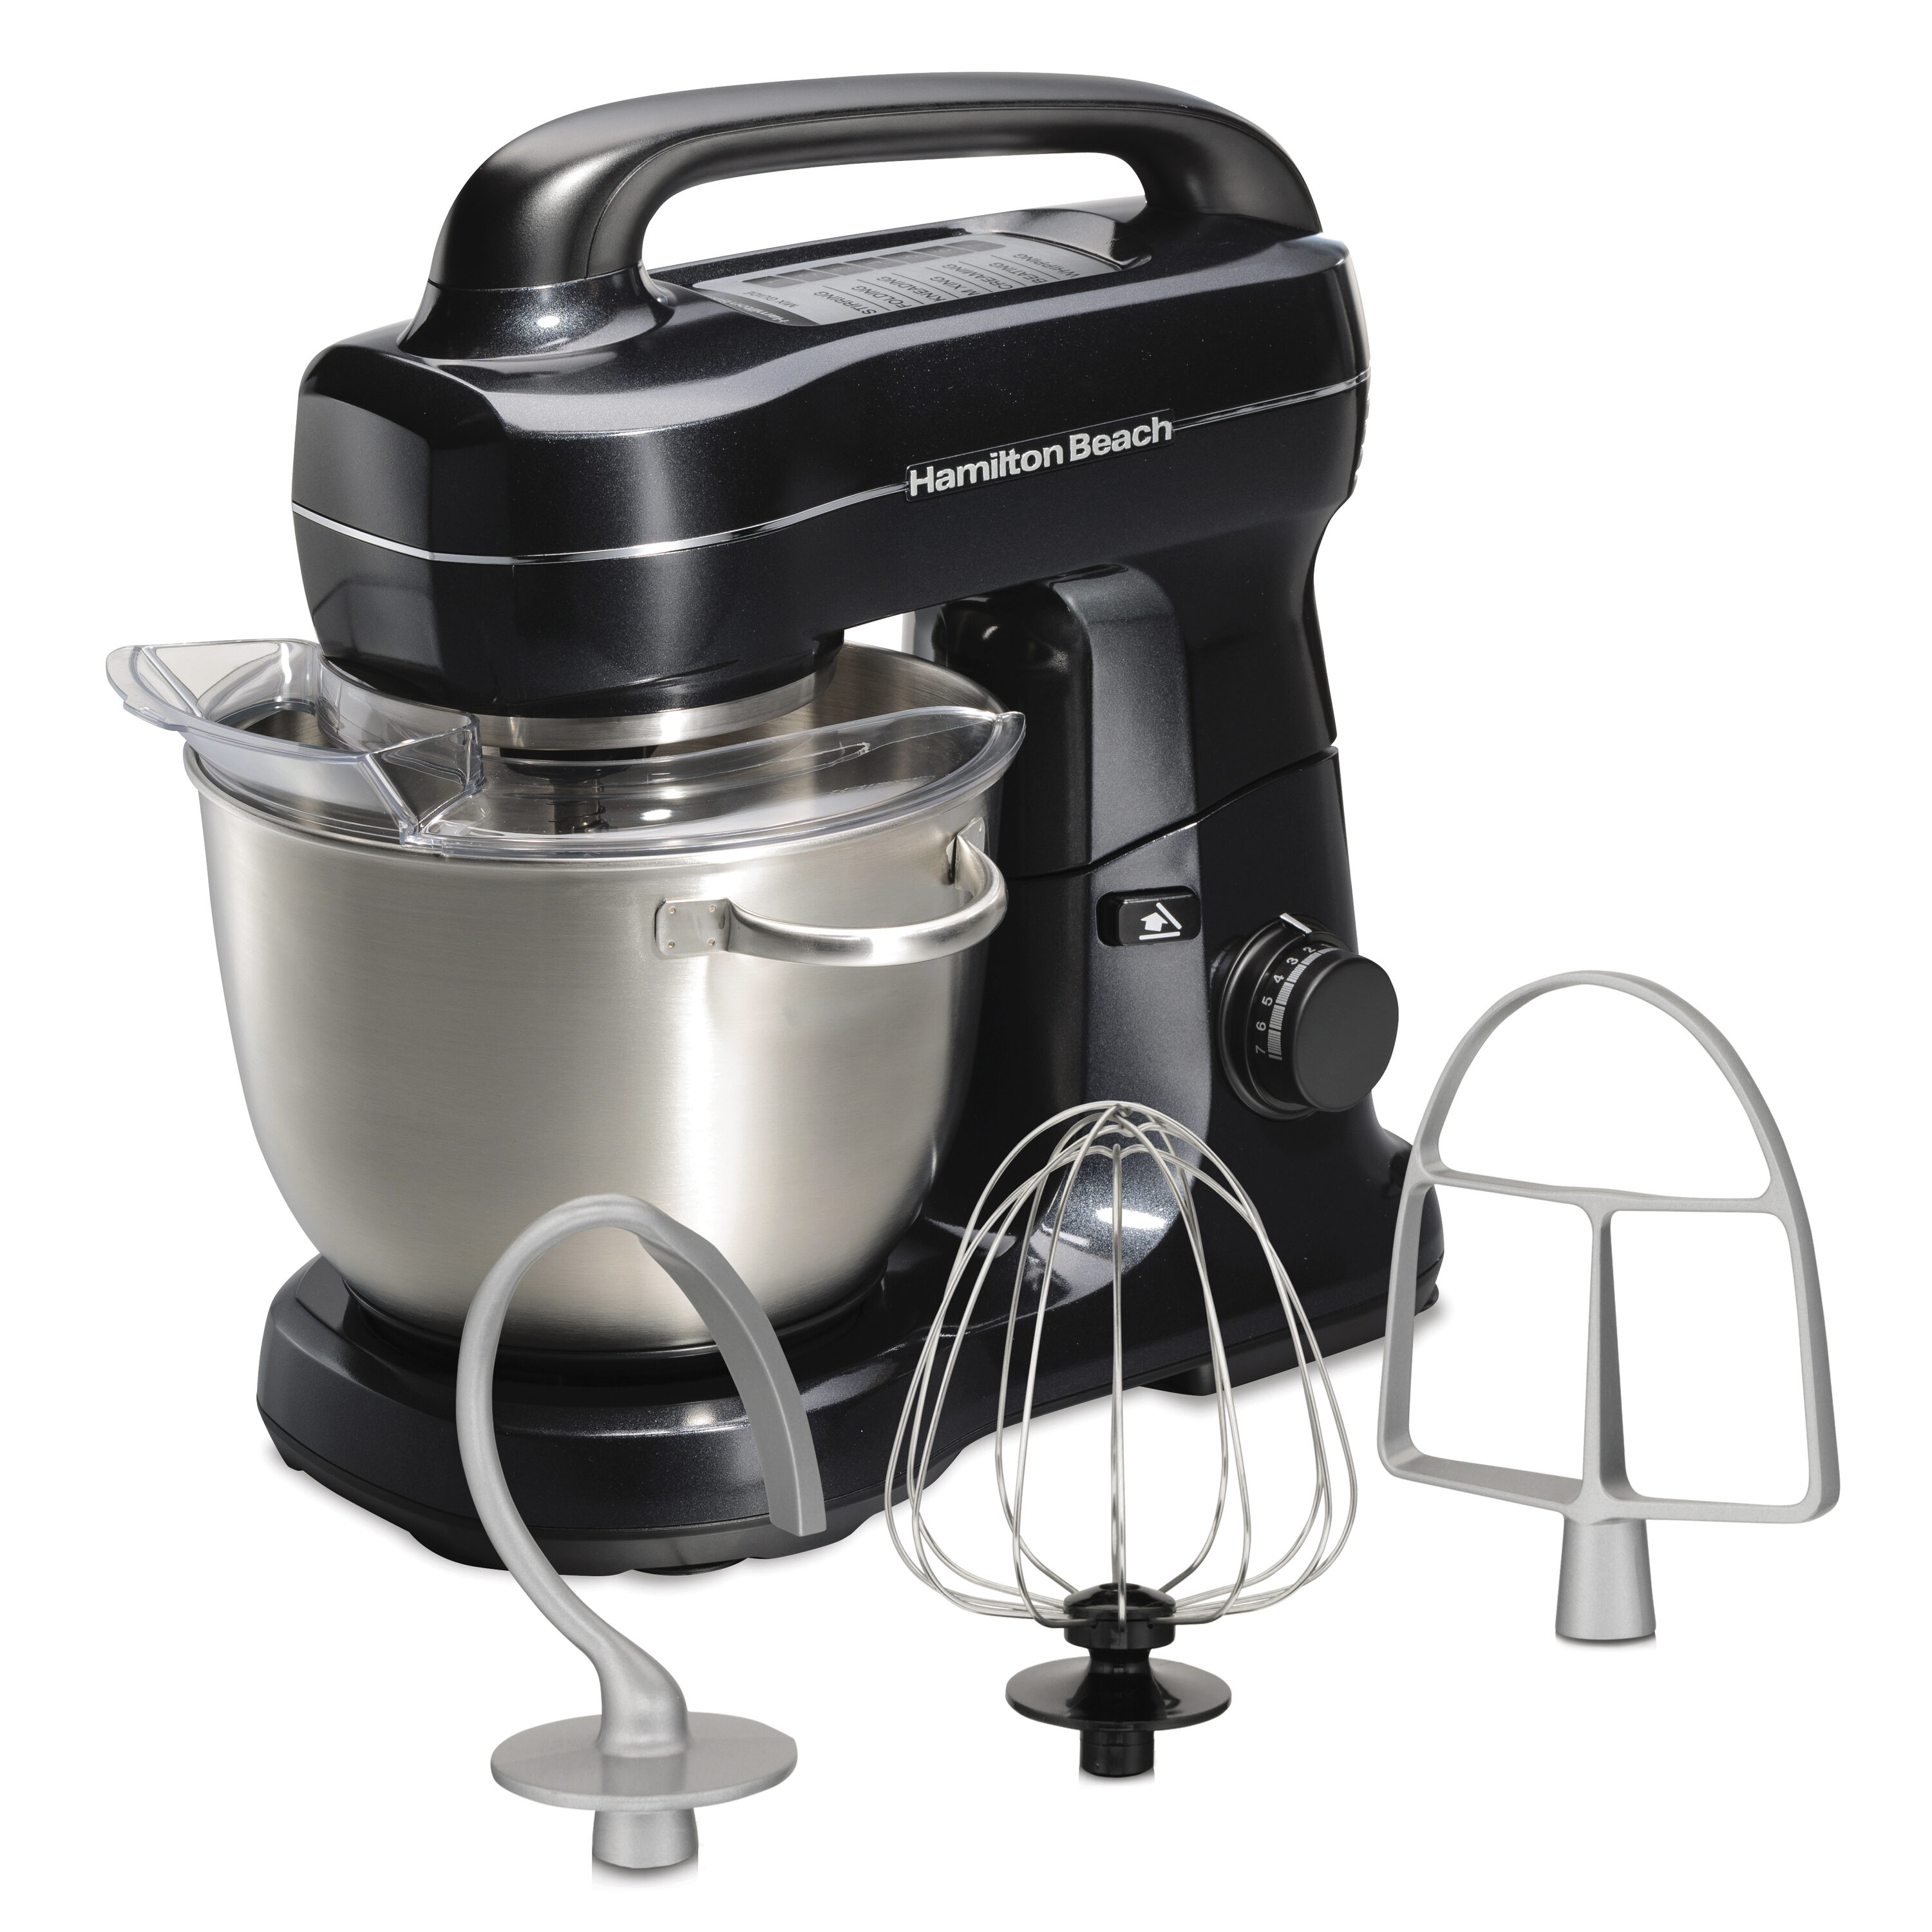  Kenmore Elite Heavy-Duty 6 Qt Bowl-Lift Stand Mixer, 600 Watts,  with Flat Beater, Wire Whisk, Dough Hook, Stainless Steel Bowls, LED Light,  Digital Countdown Timer, Metallic Grey: Home & Kitchen